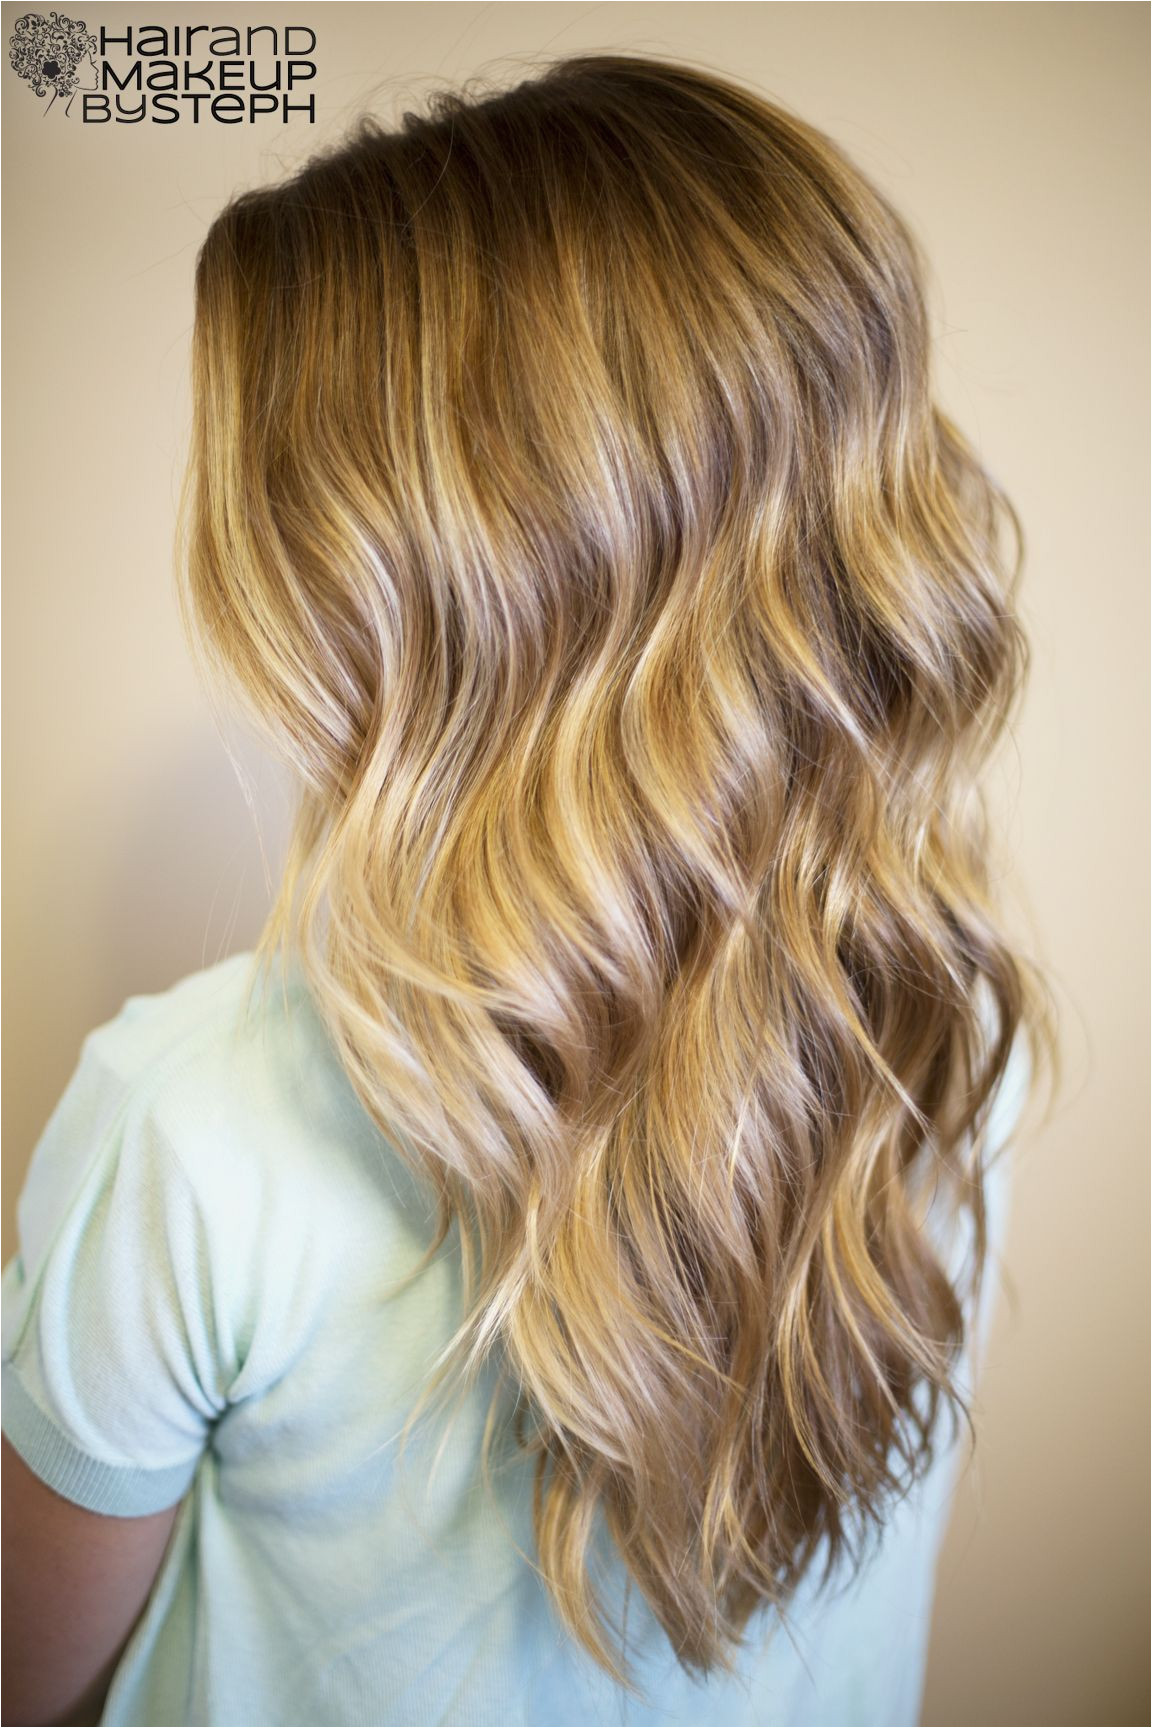 Curls created with the José Eber Trio clipless curling iron blog hairandmakeupbysteph